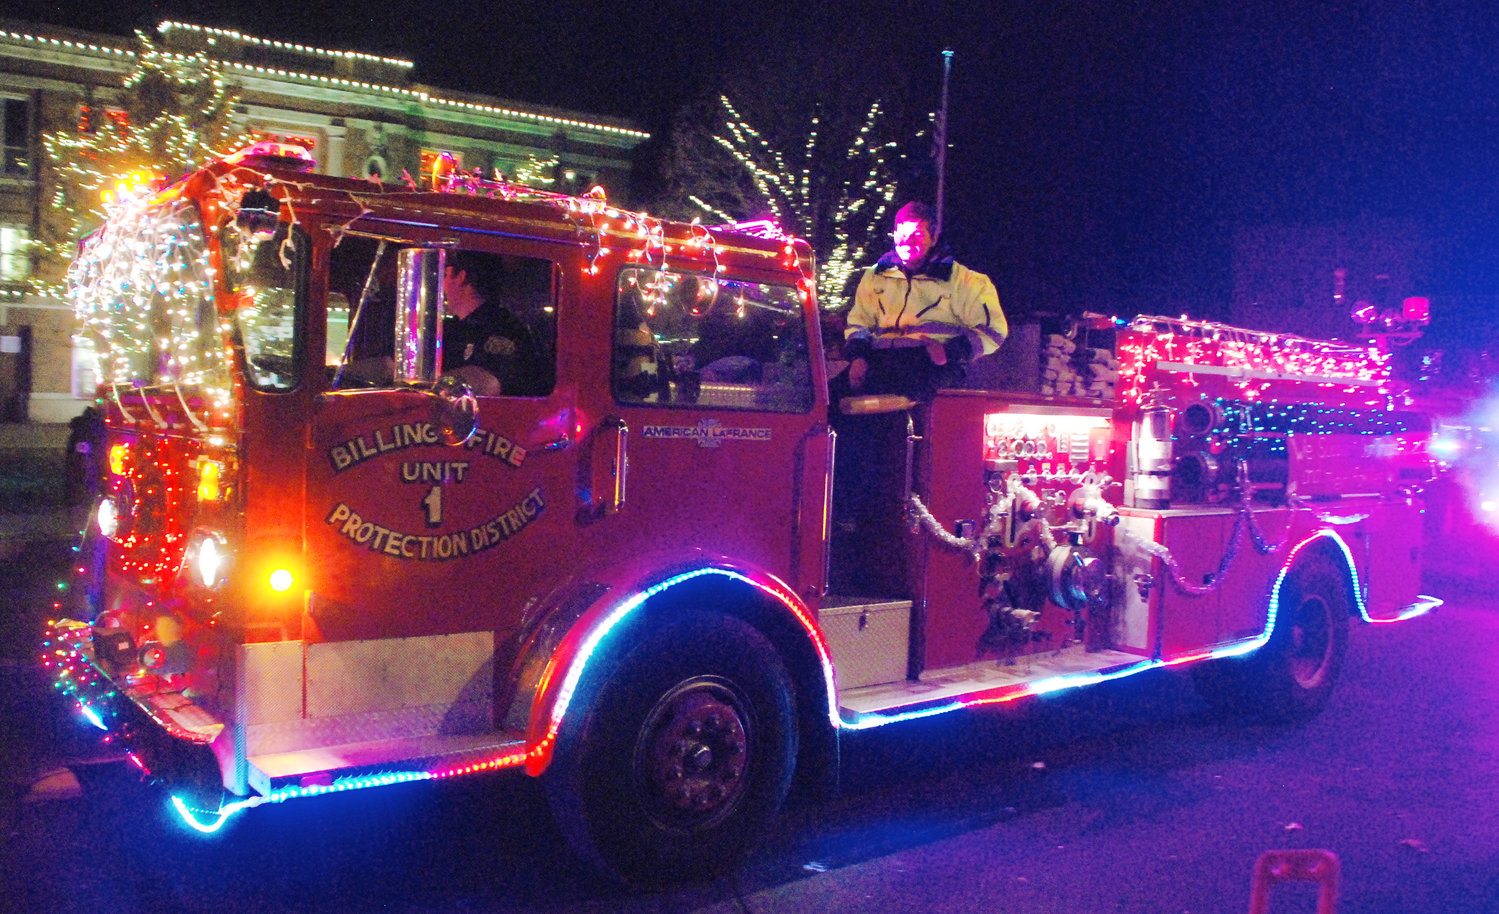 THE BILLINGS FIRE PROTECTION DISTRICT entered one of its fire engines in the 2021 Ozark Christmas Parade.